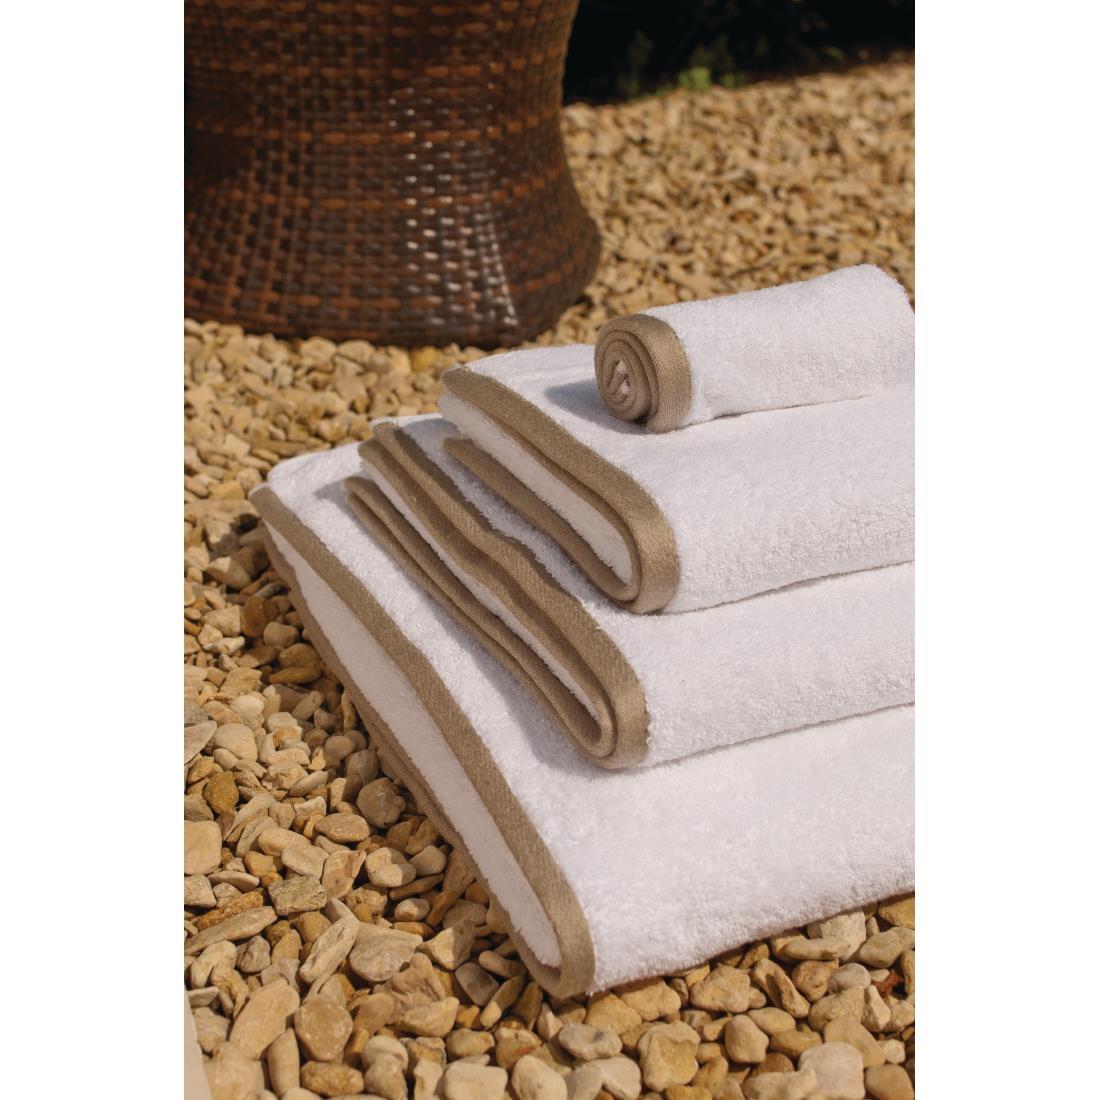 Mitre Heritage Ambassador Hand Towel White with Taupe Border - GW311  - 1